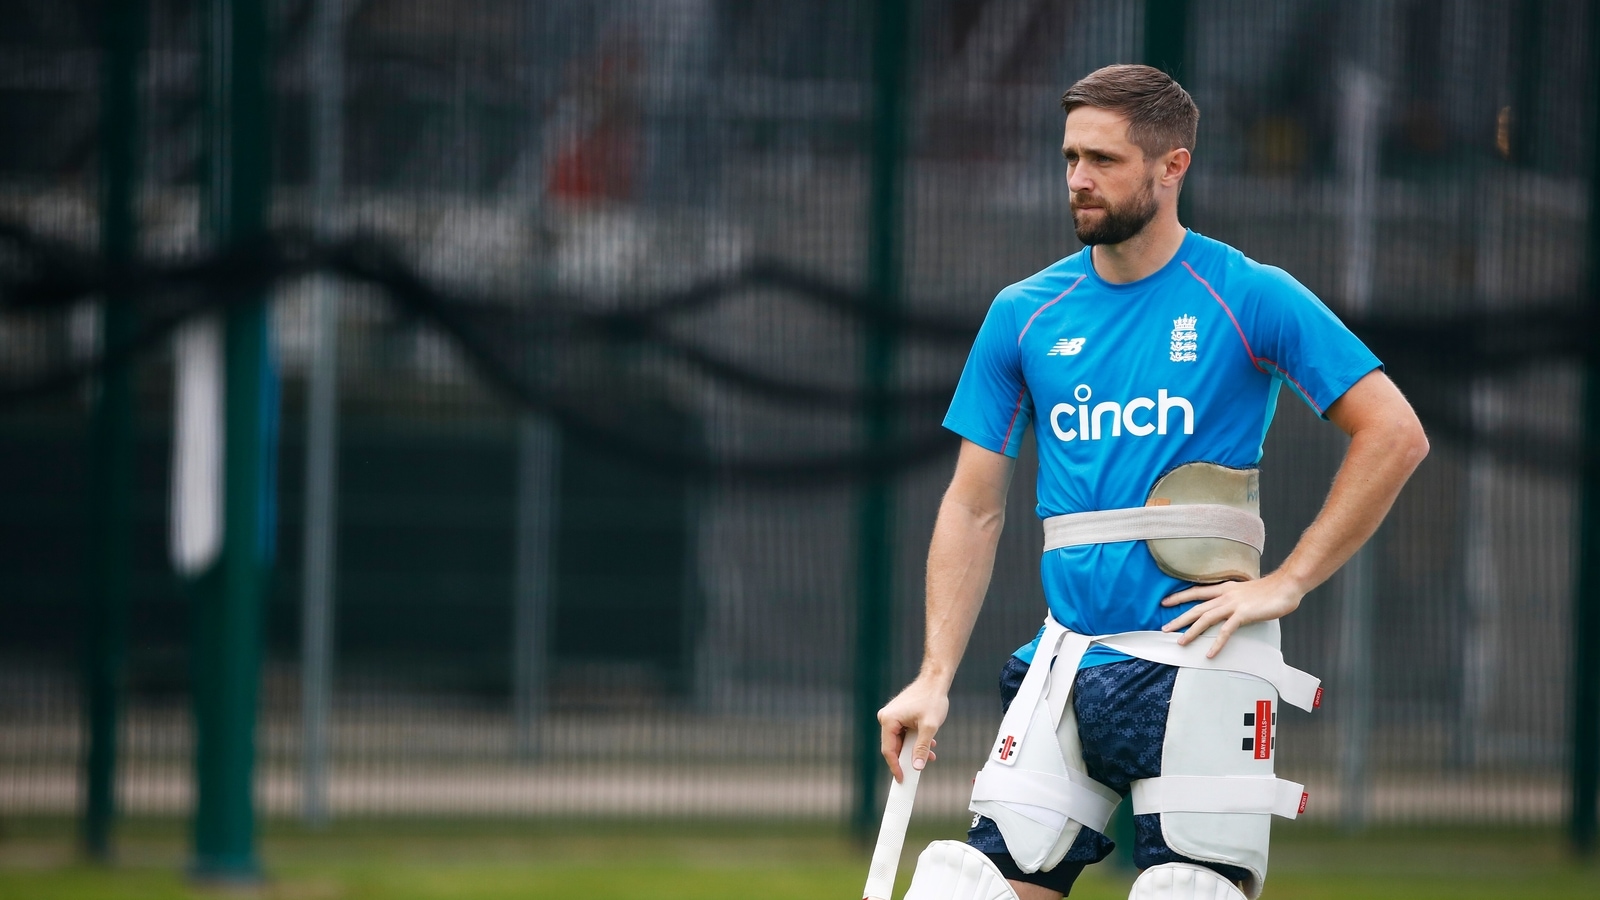 Chris Woakes must give importance to the Ashes and World Cup over IPL: Indian Premier League 2021